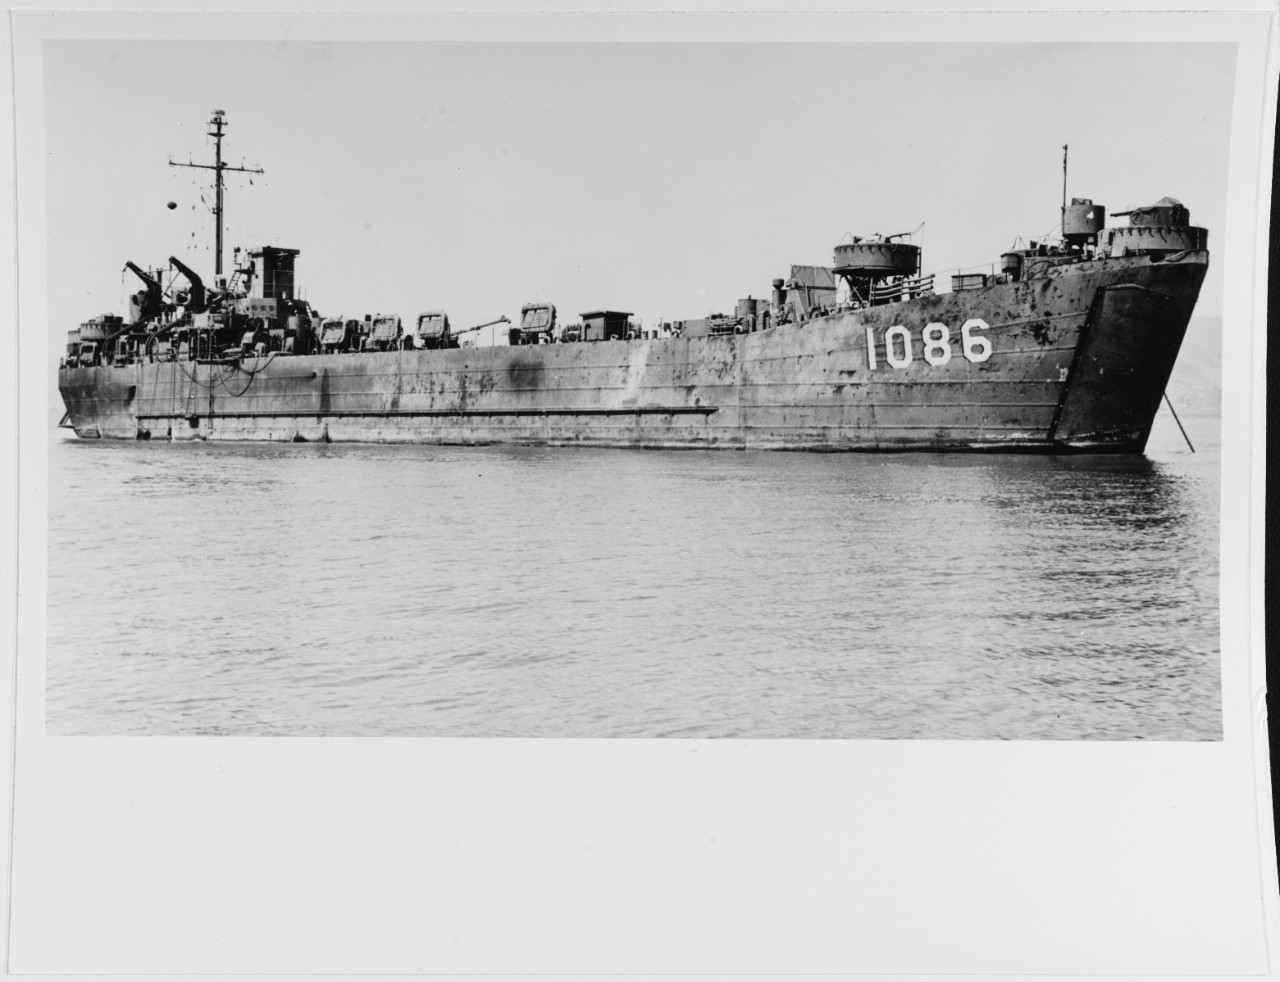 USS LST - 1086 (later: POTTER COUNTY)